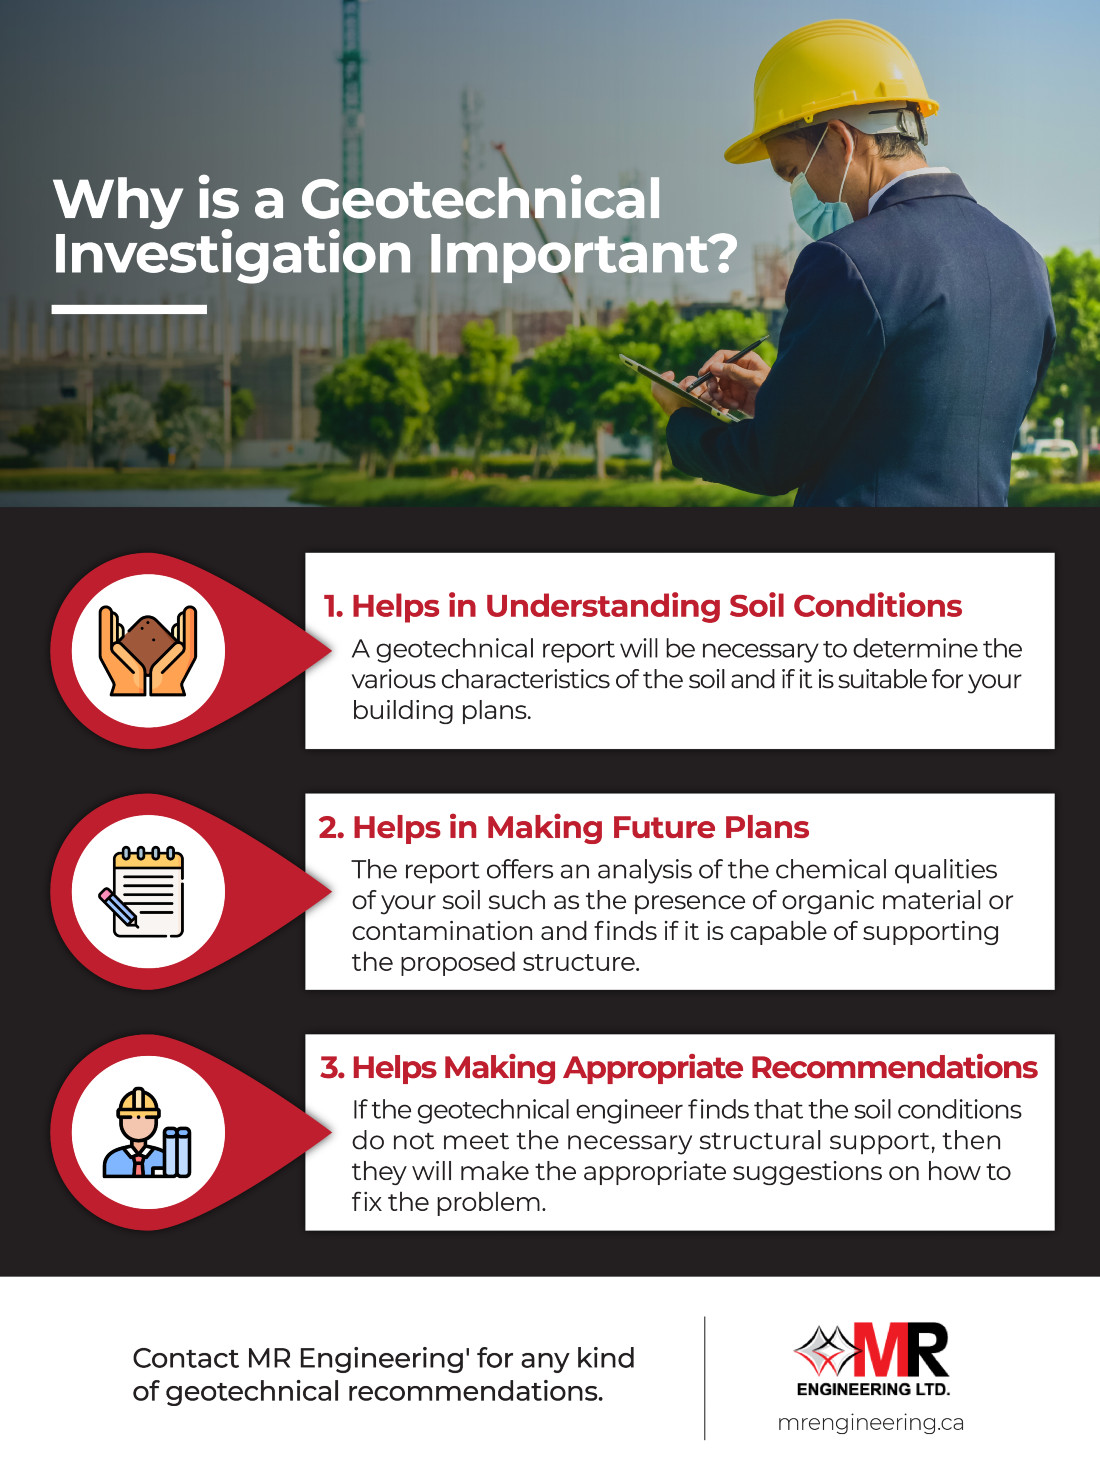 Why is Geotechnical Investigation Important